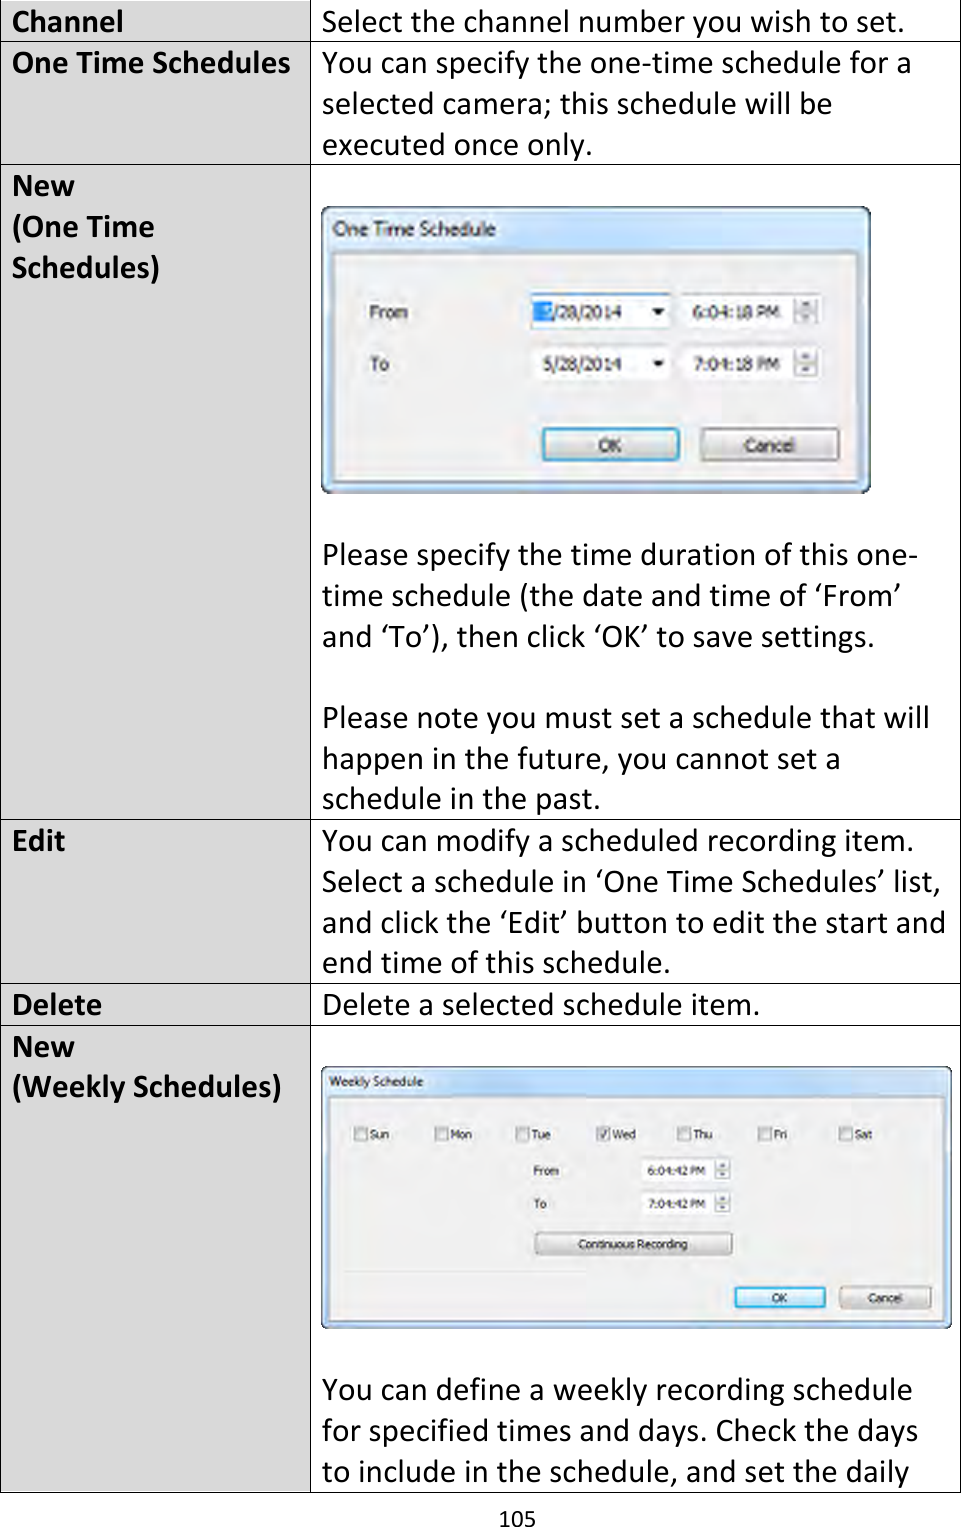 105   Channel Select the channel number you wish to set. One Time Schedules You can specify the one-time schedule for a selected camera; this schedule will be executed once only. New  (One Time Schedules)    Please specify the time duration of this one-time schedule (the date and time of ‘From’ and ‘To’), then click ‘OK’ to save settings.  Please note you must set a schedule that will happen in the future, you cannot set a schedule in the past. Edit You can modify a scheduled recording item. Select a schedule in ‘One Time Schedules’ list, and click the ‘Edit’ button to edit the start and end time of this schedule. Delete Delete a selected schedule item. New (Weekly Schedules)    You can define a weekly recording schedule for specified times and days. Check the days to include in the schedule, and set the daily 